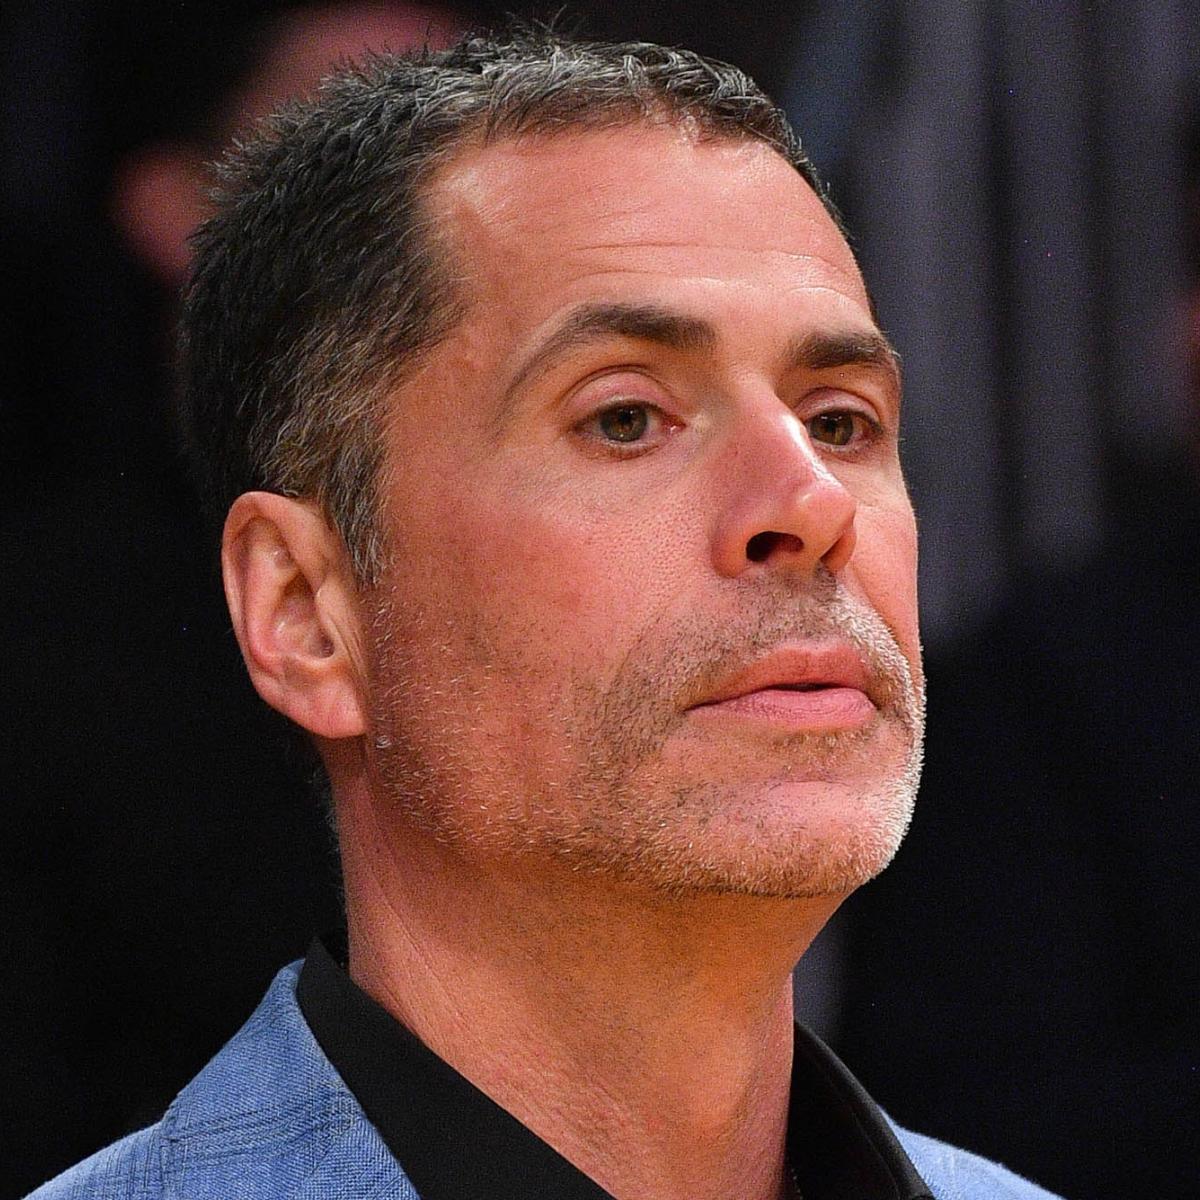 Lakers’ Settle Pelinka Says the Orlando Bubble Will Be a ‘Mental Test’